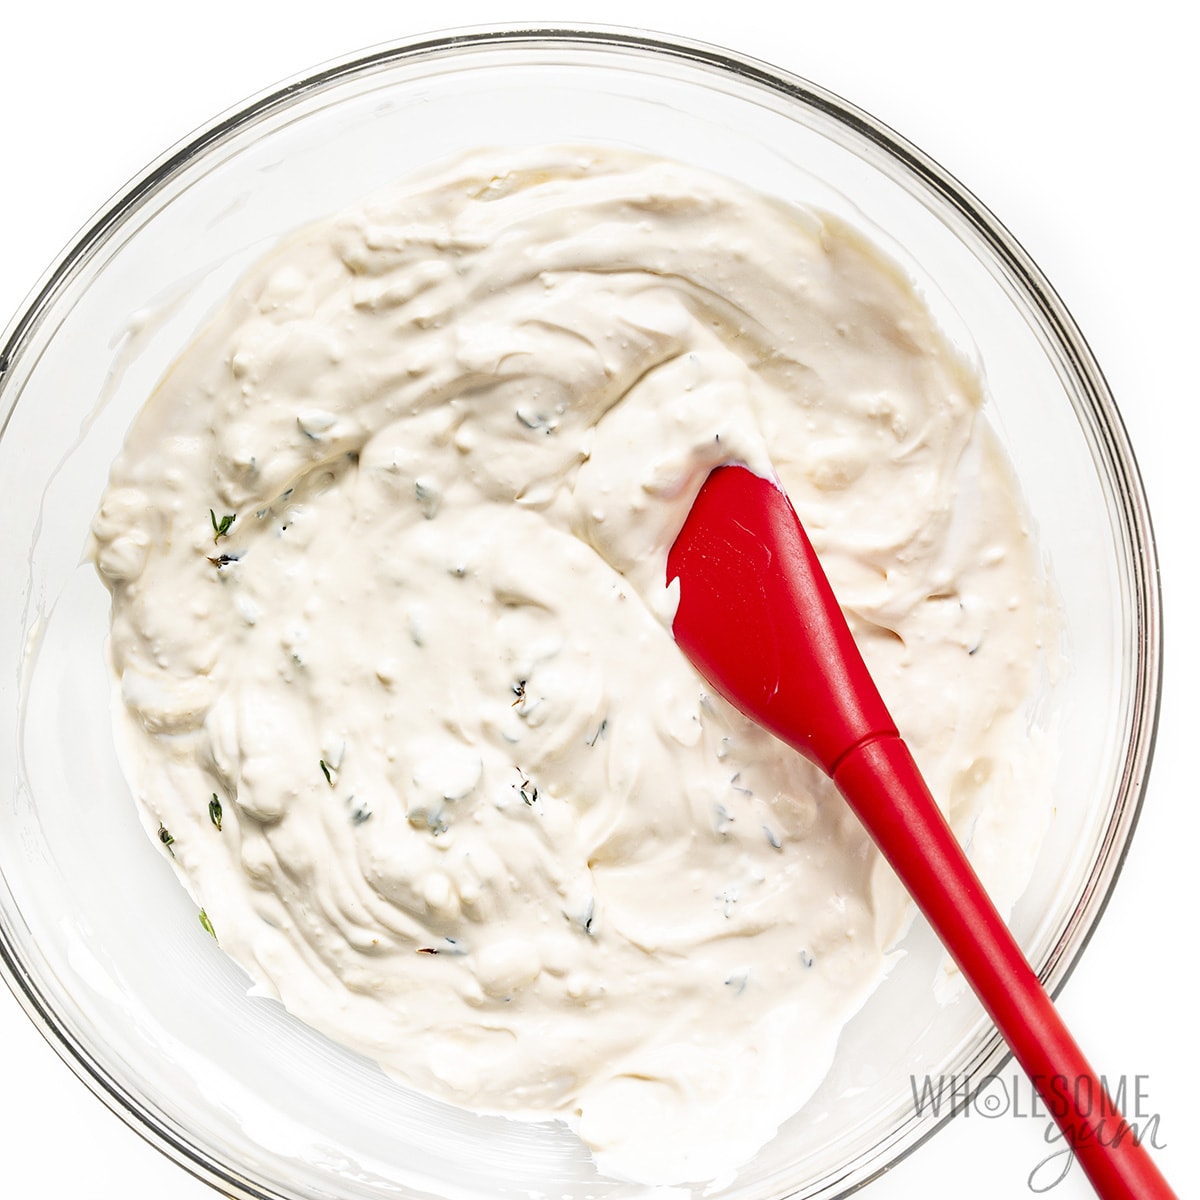 Cream cheese, sour cream, molasses, thyme, and salt mixed together in a bowl.